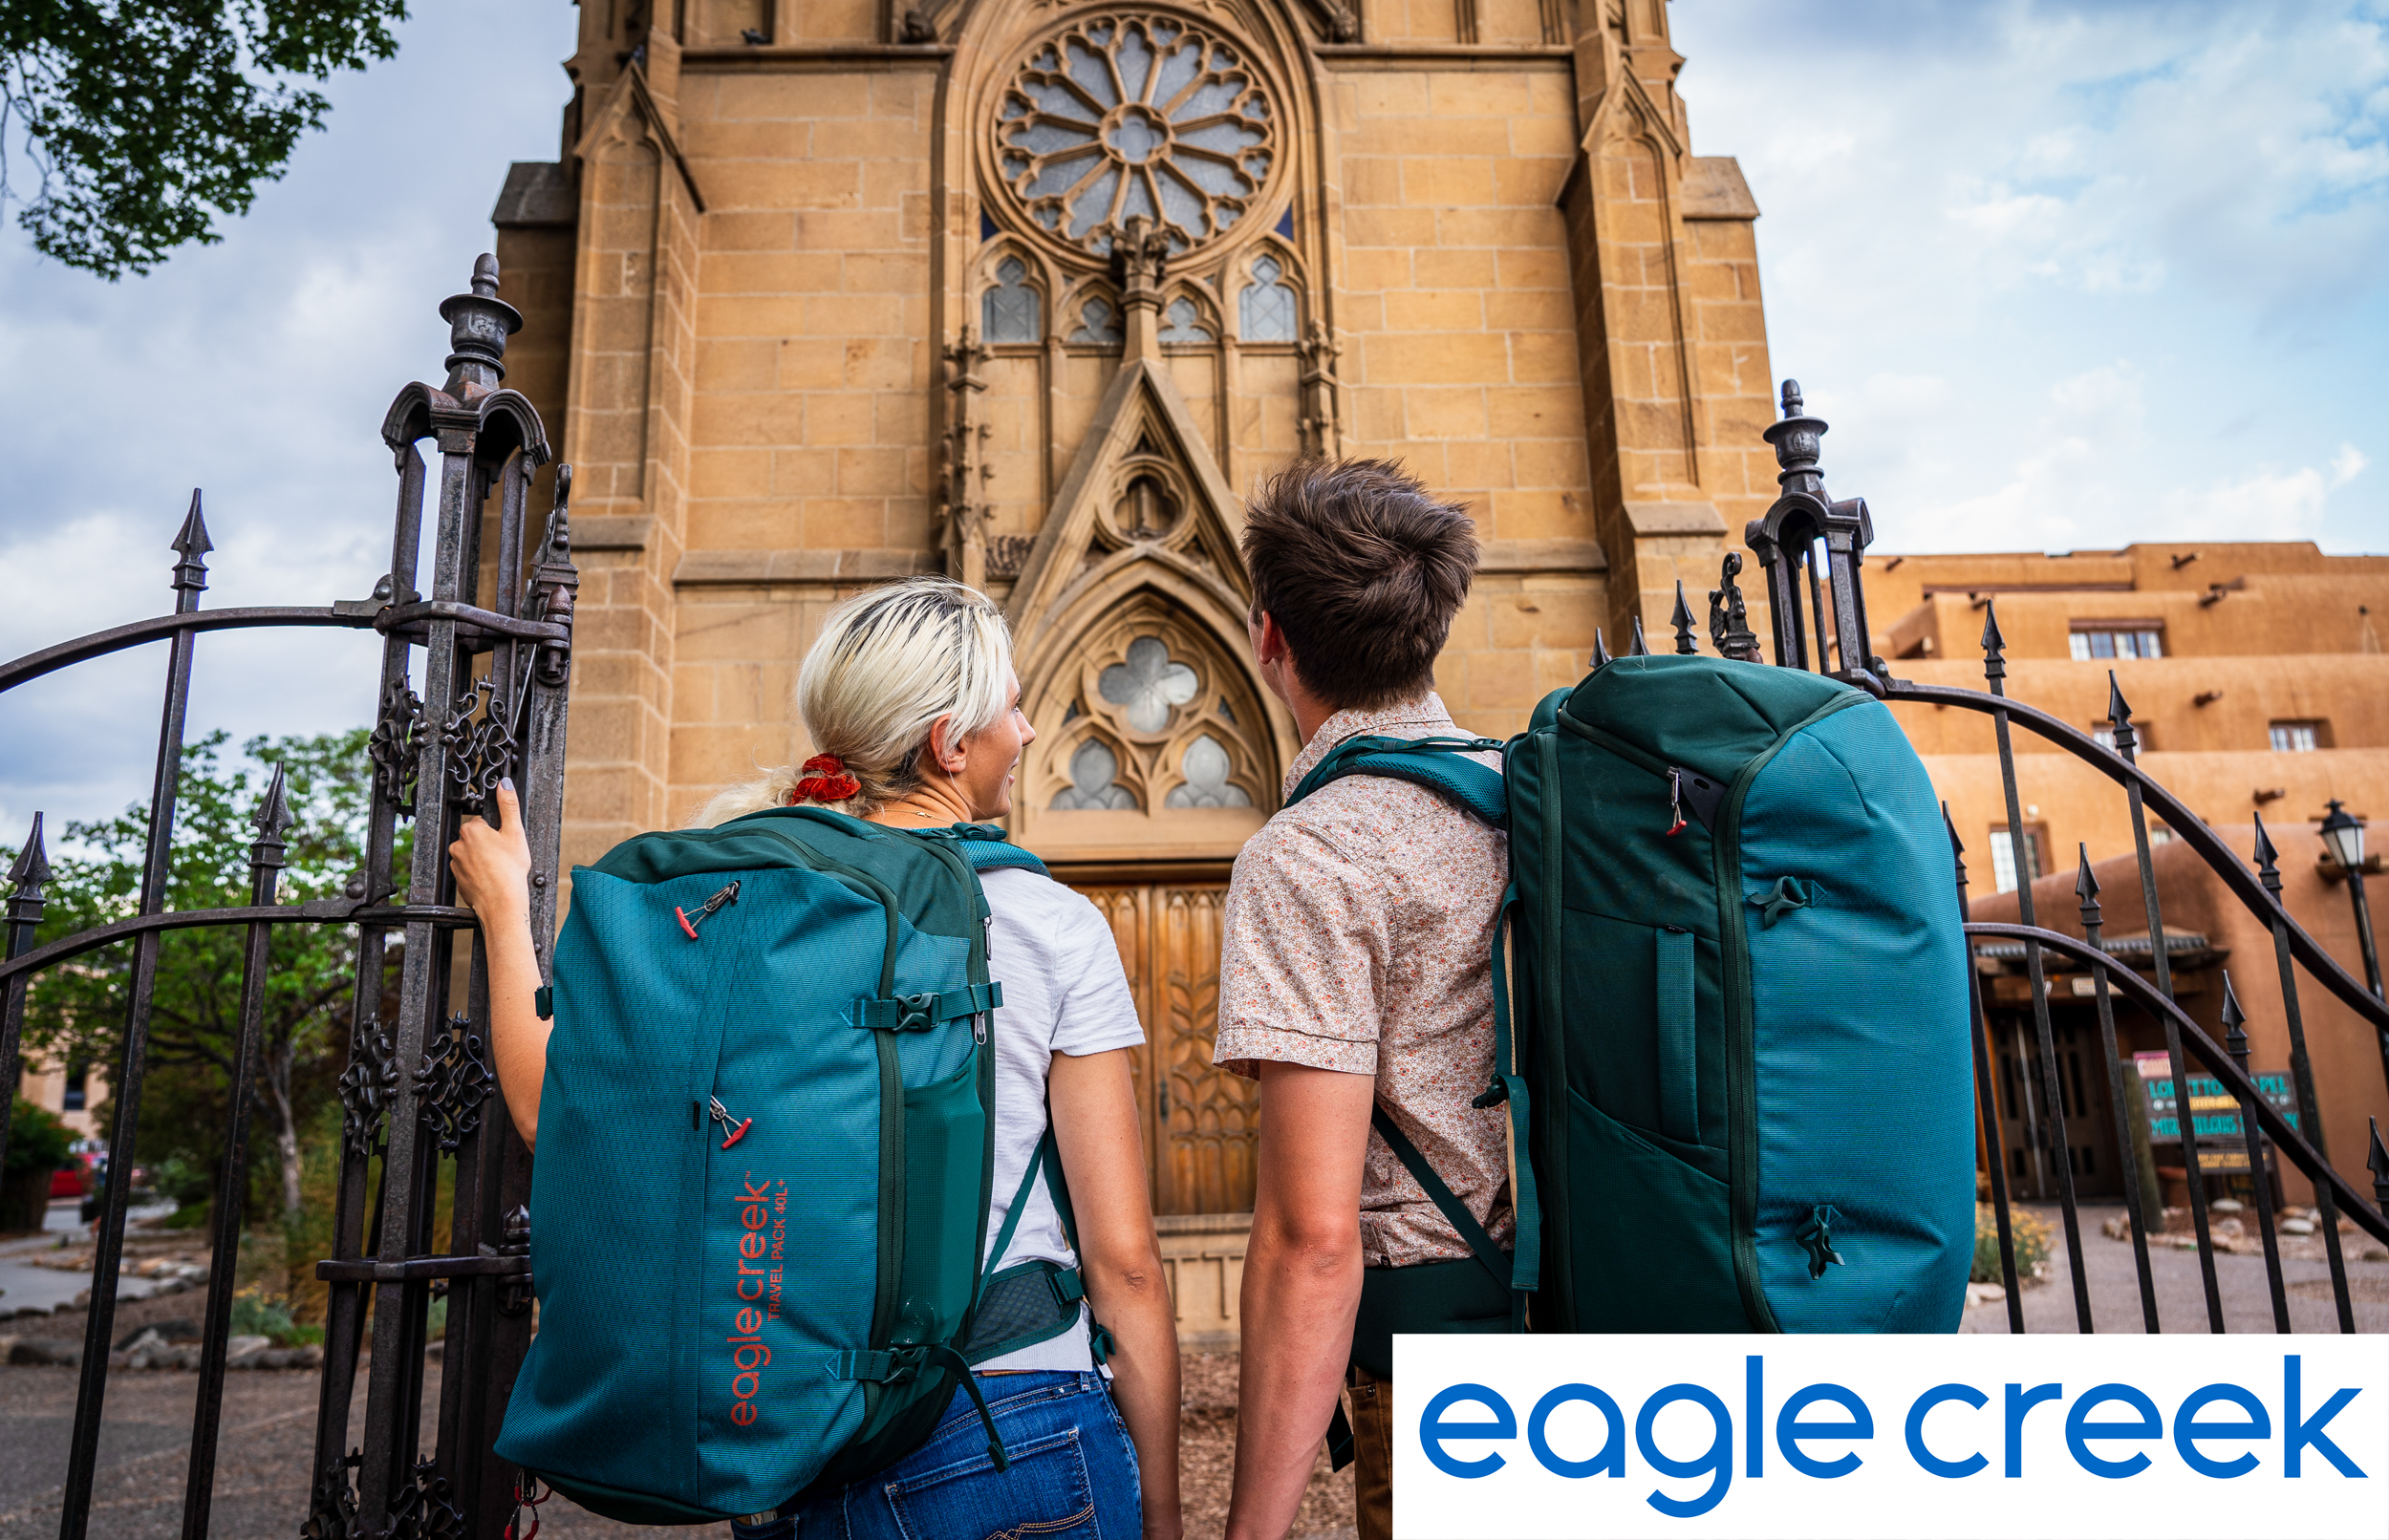 Tourist with Eagle Creek gear Looking at Church